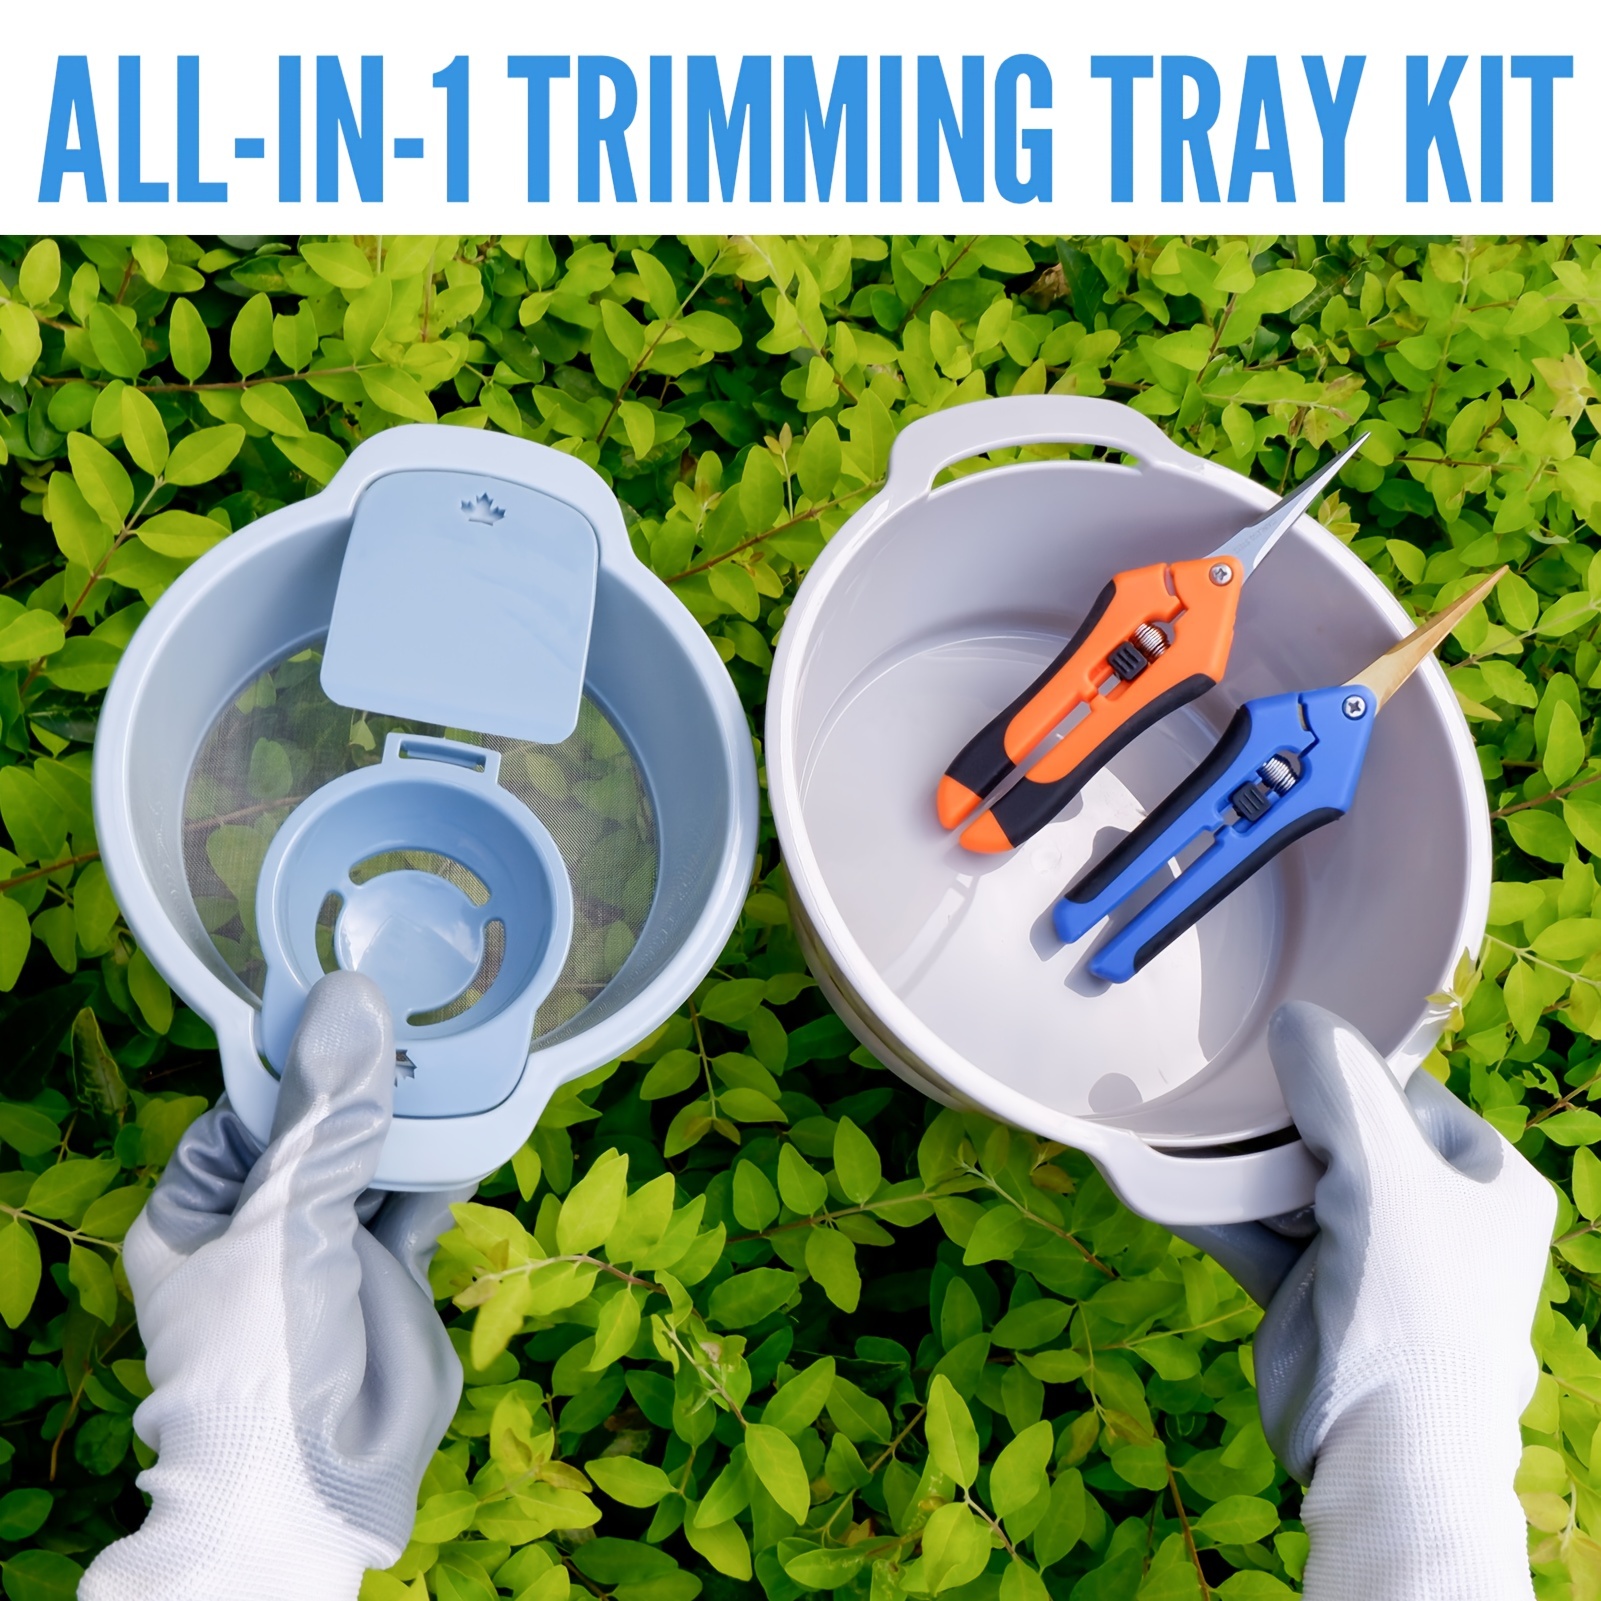 Heavy Duty 2-In-1 Trimming Tray for Herbals Collecting, Dry Sift